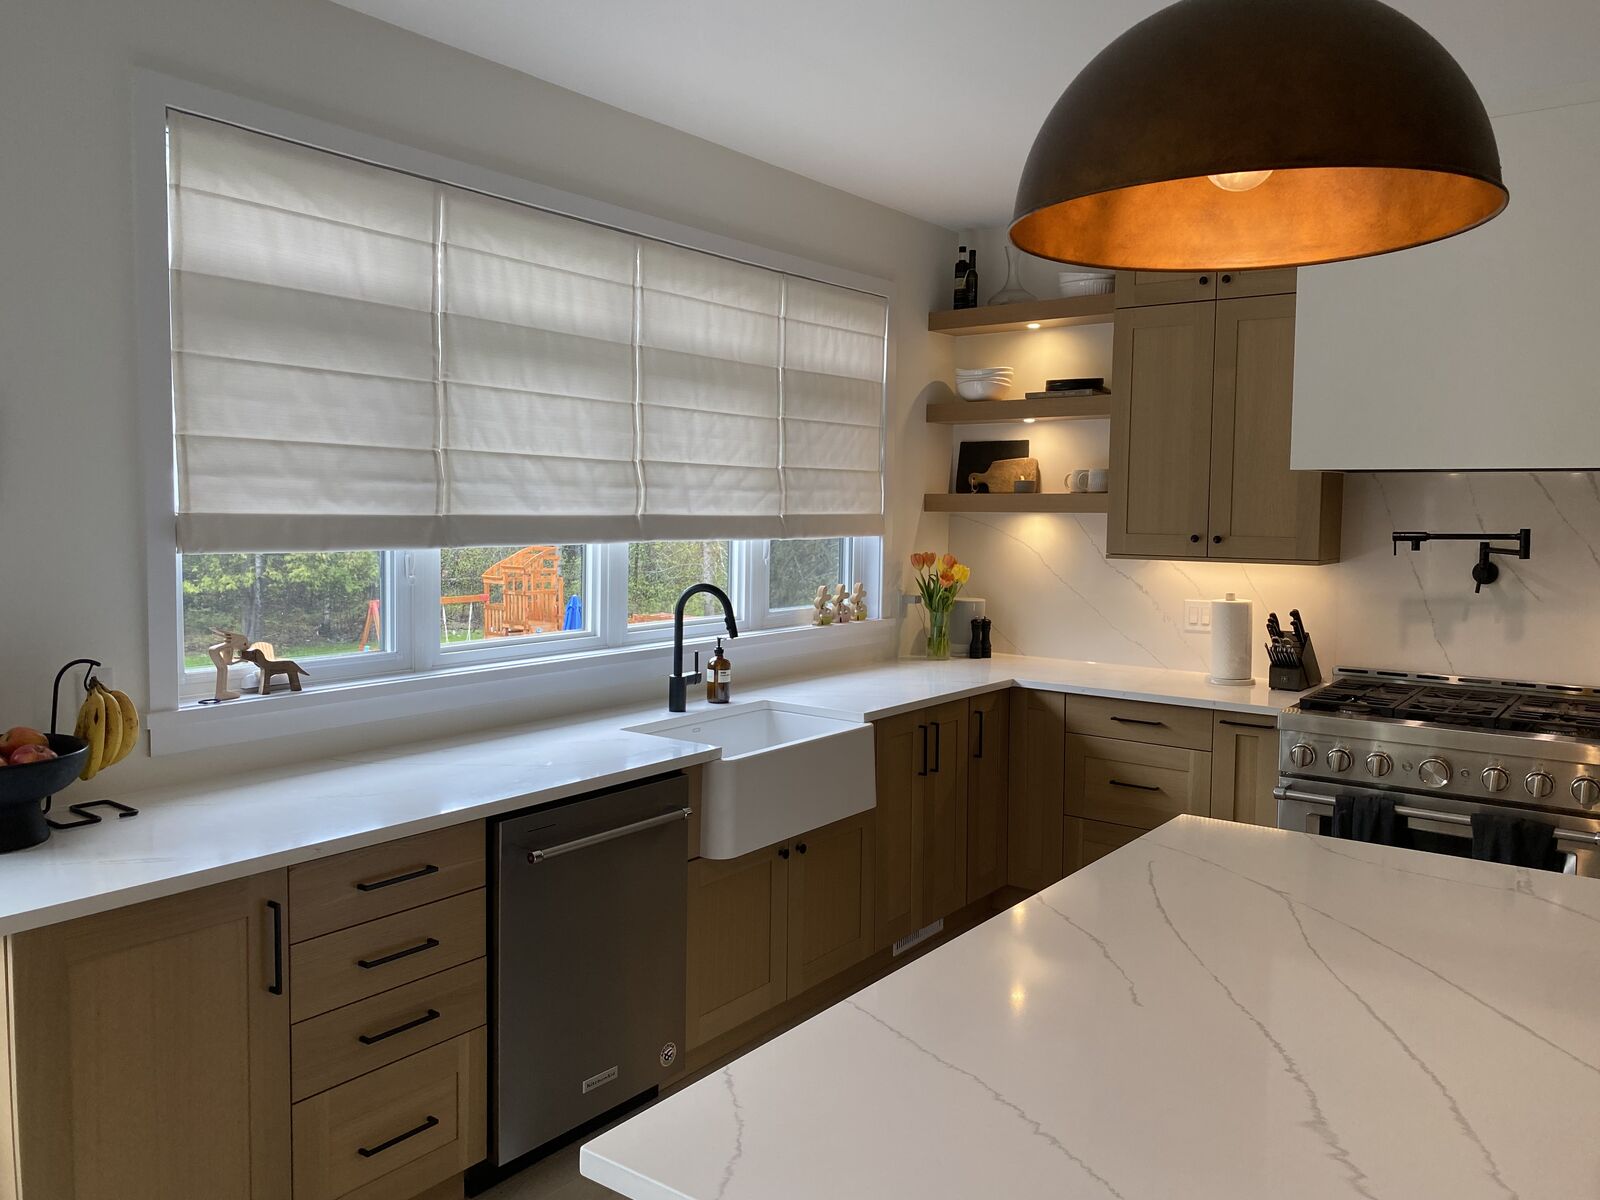 A modern kitchen features four windows partially covered with flat roman shades.